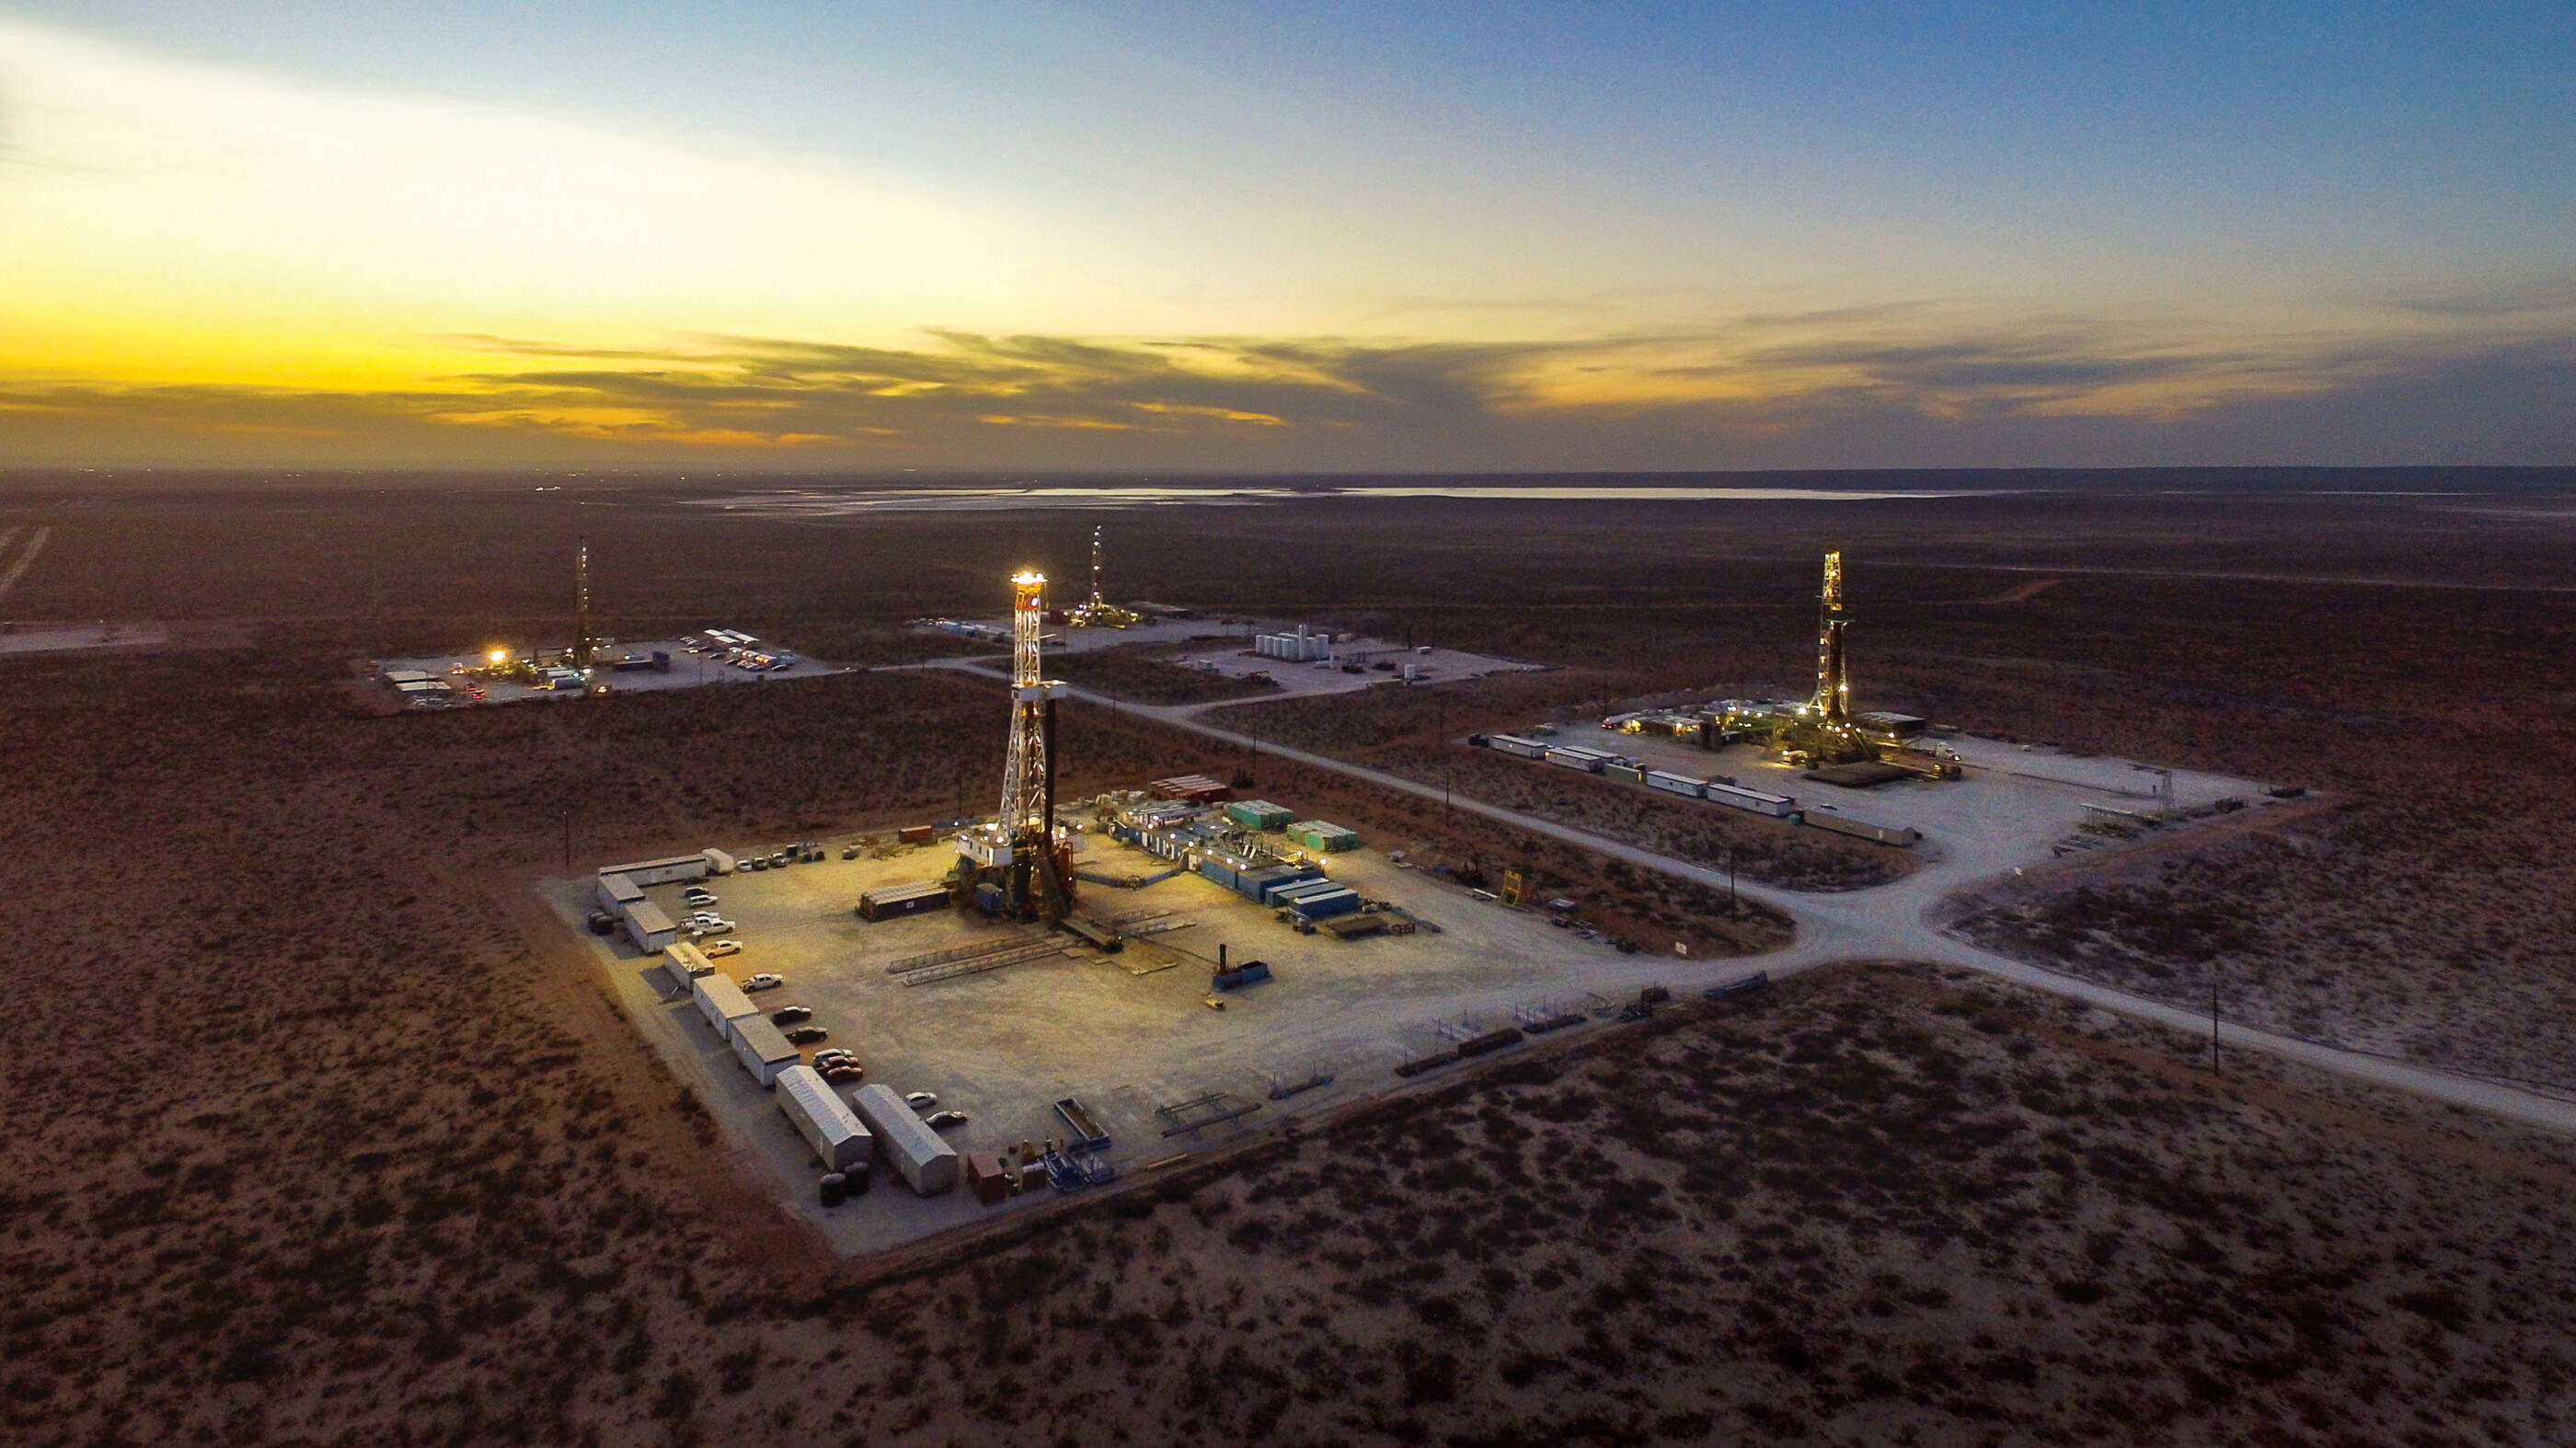 Image ExxonMobil is working to find new and better ways to monitor and reduce methane emissions, including in its Permian operations.